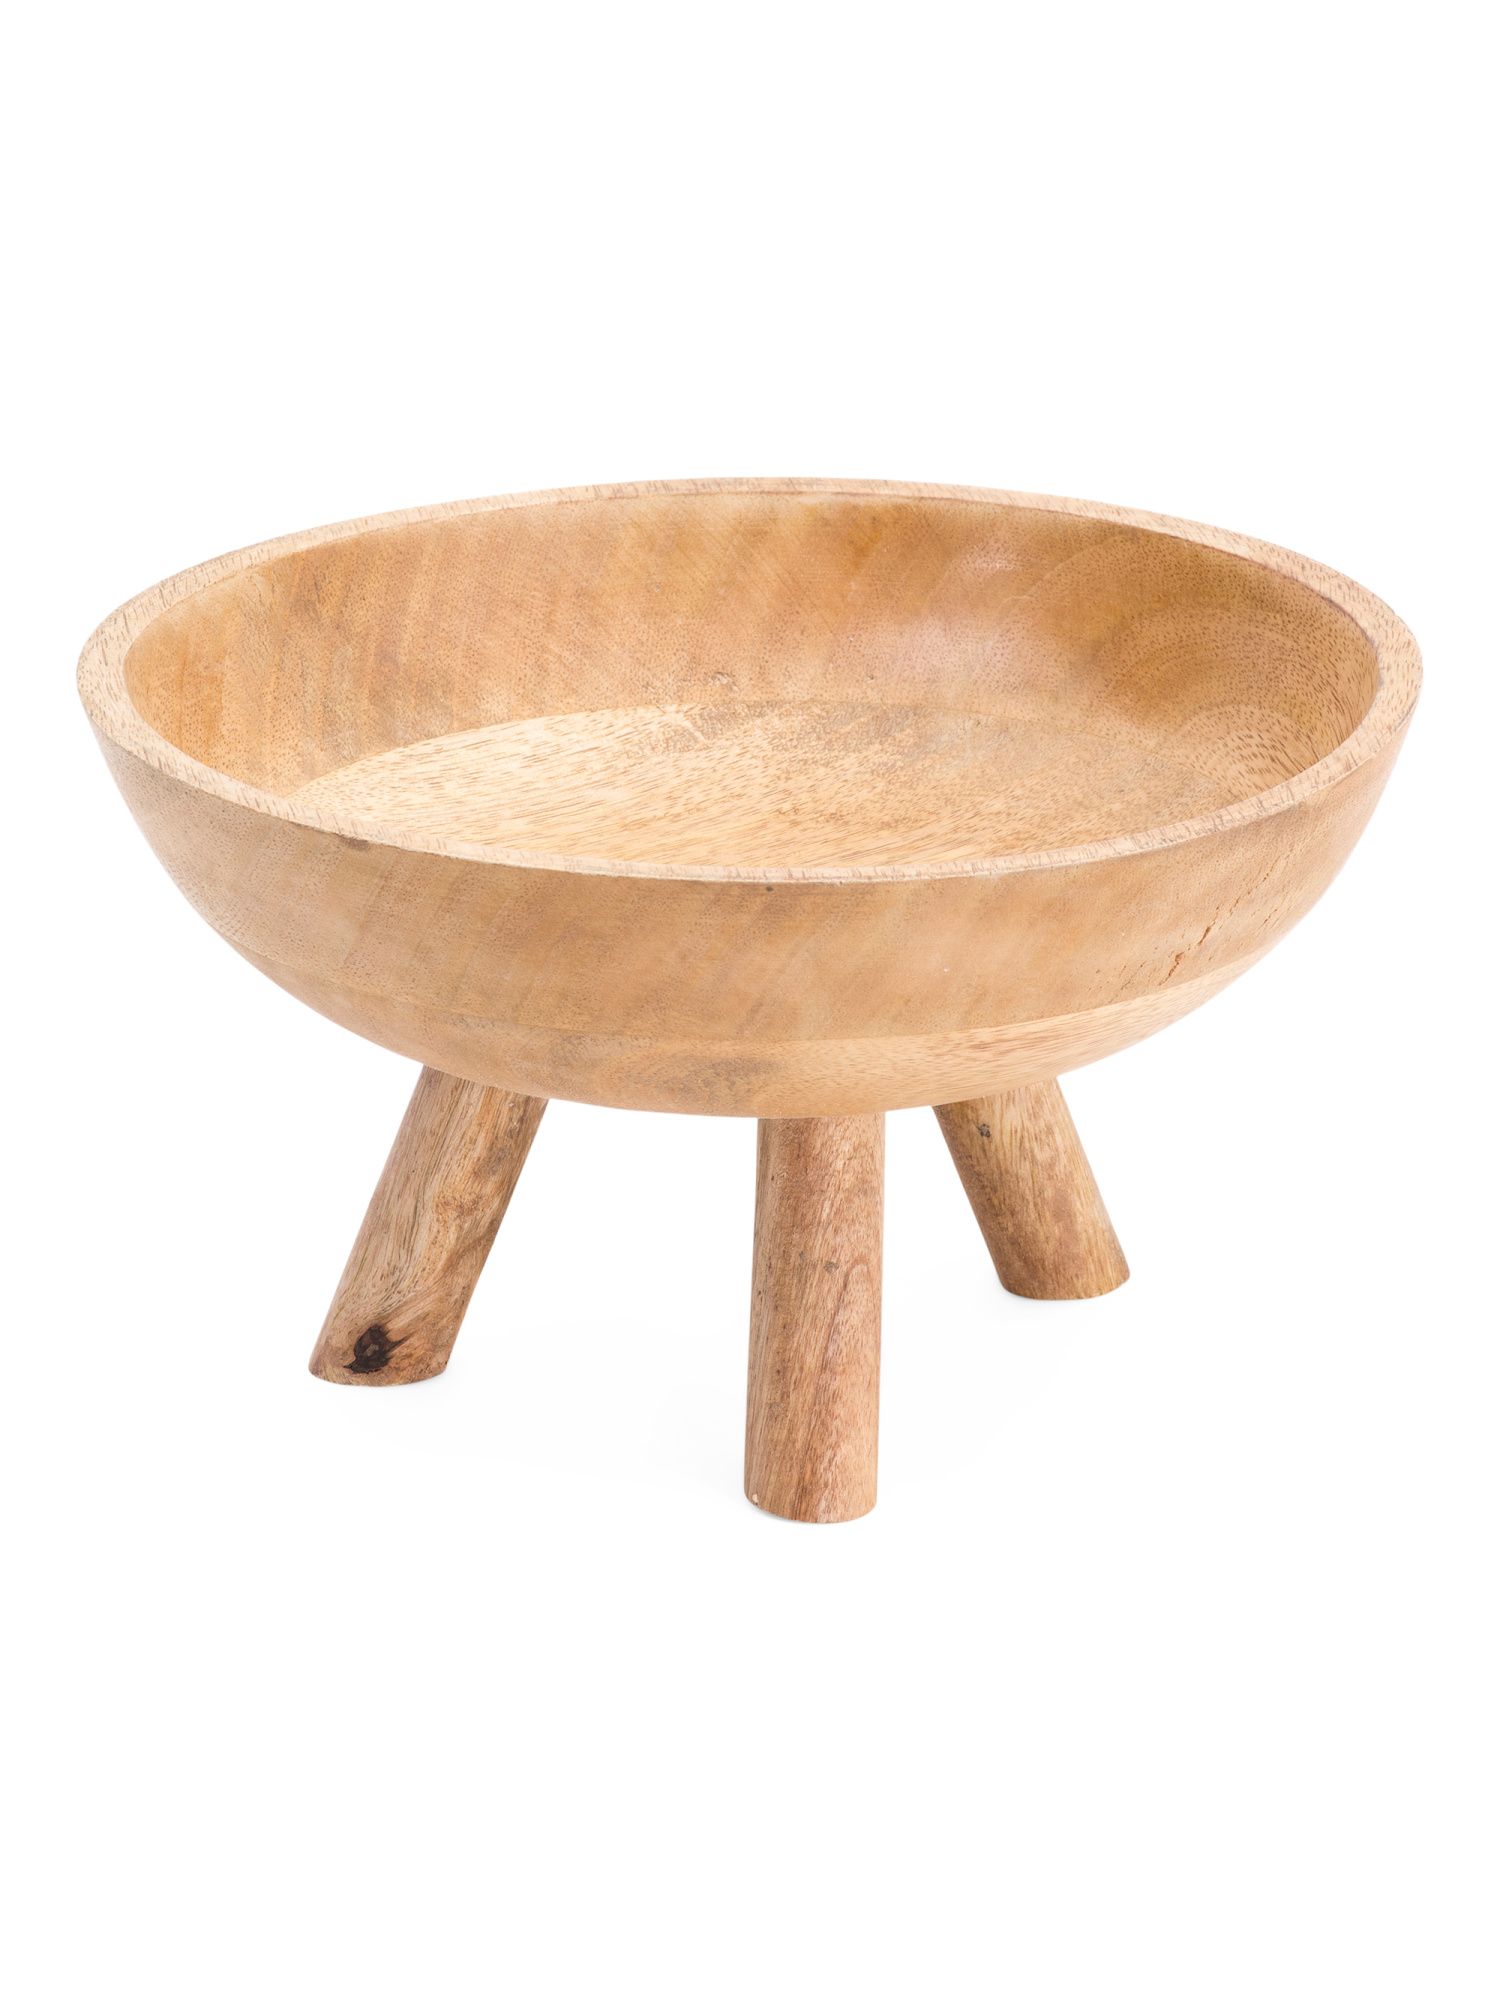 10in Wooden Bowl With 3 Legs | TJ Maxx